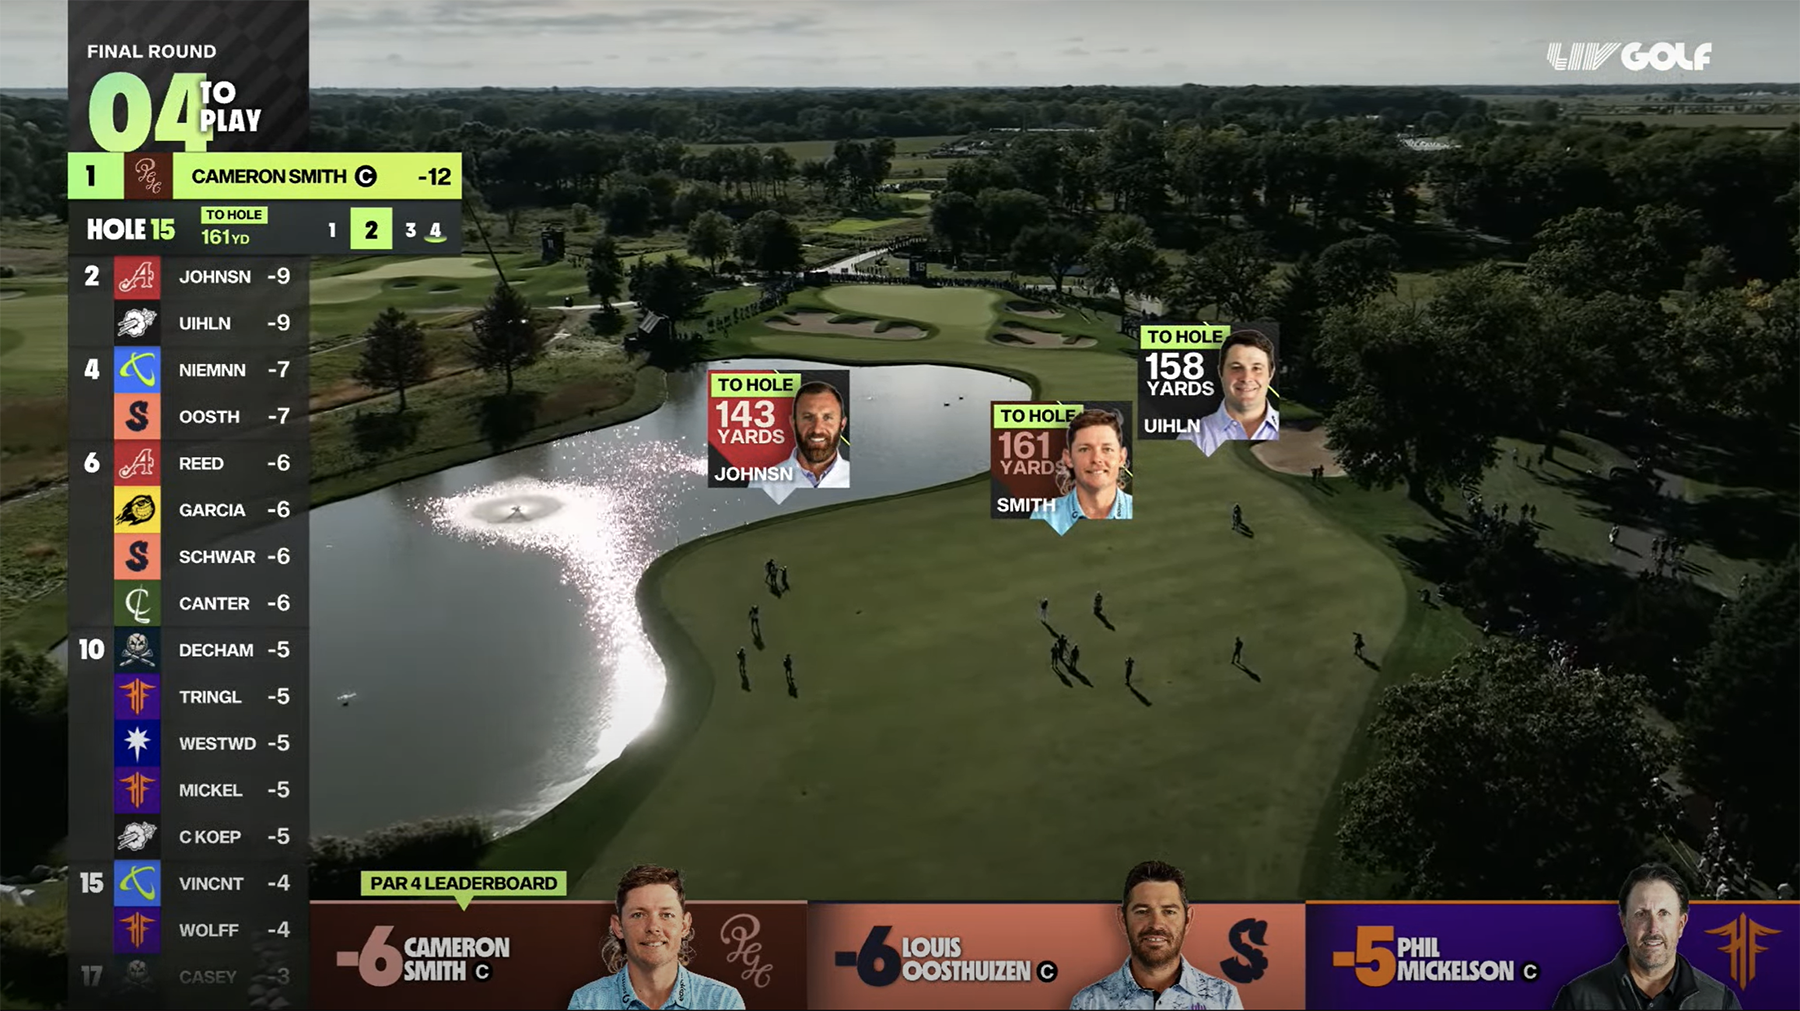 LIV Golf Heads Into Season 2 With More Drone Coverage, Enhanced Virtual Graphics, a Spot on The CW